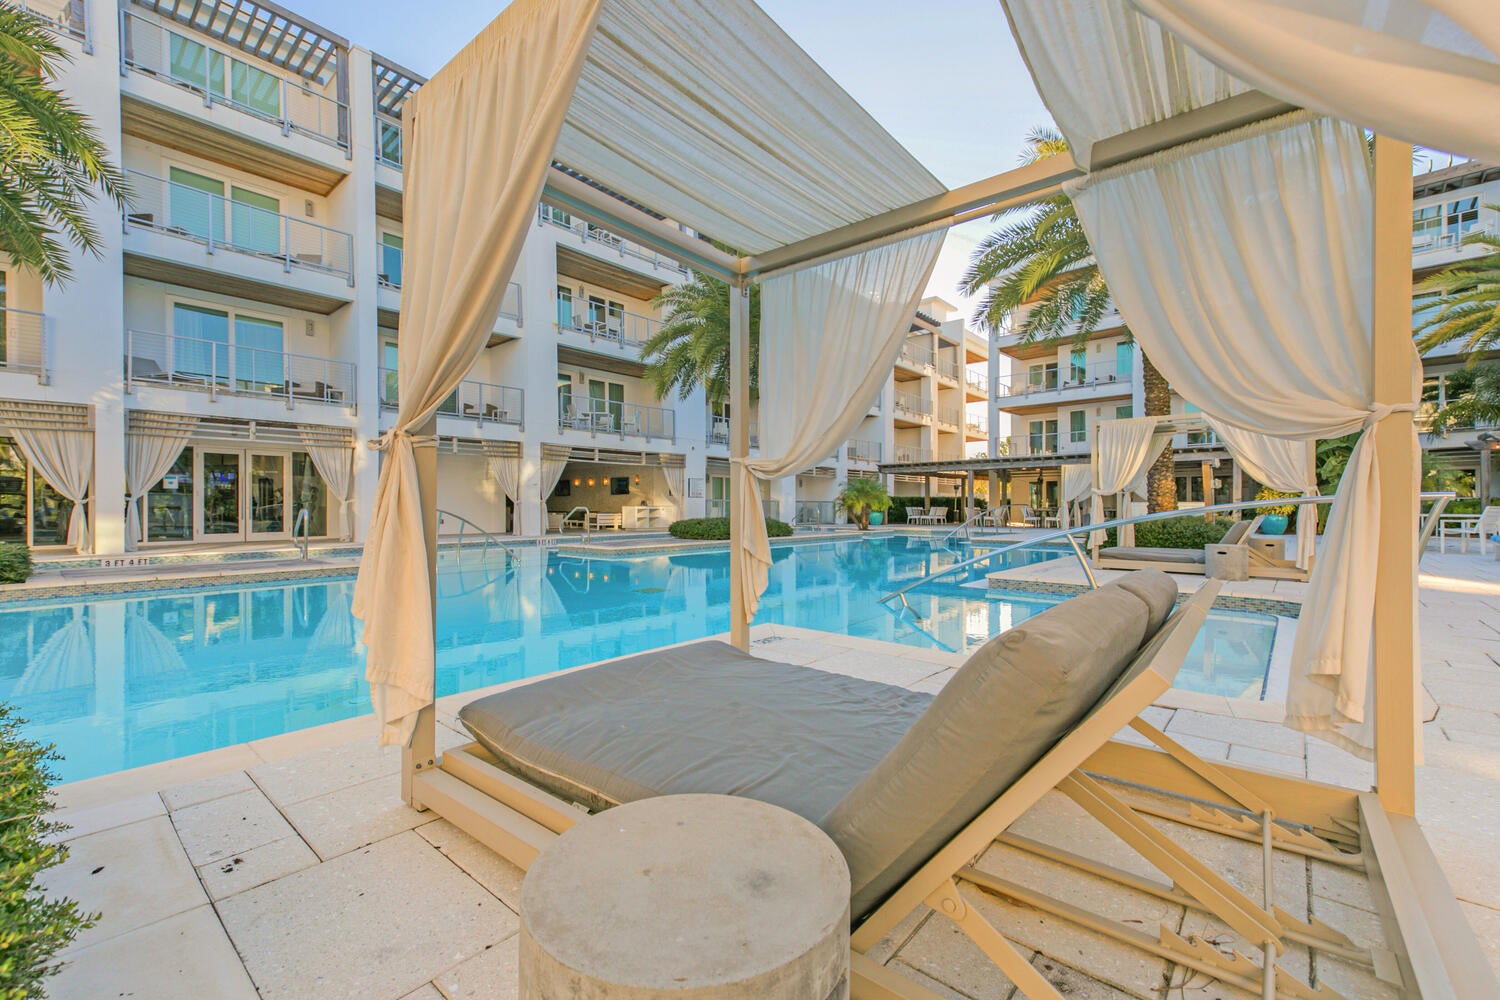 Grab a cabana and relax by the pool